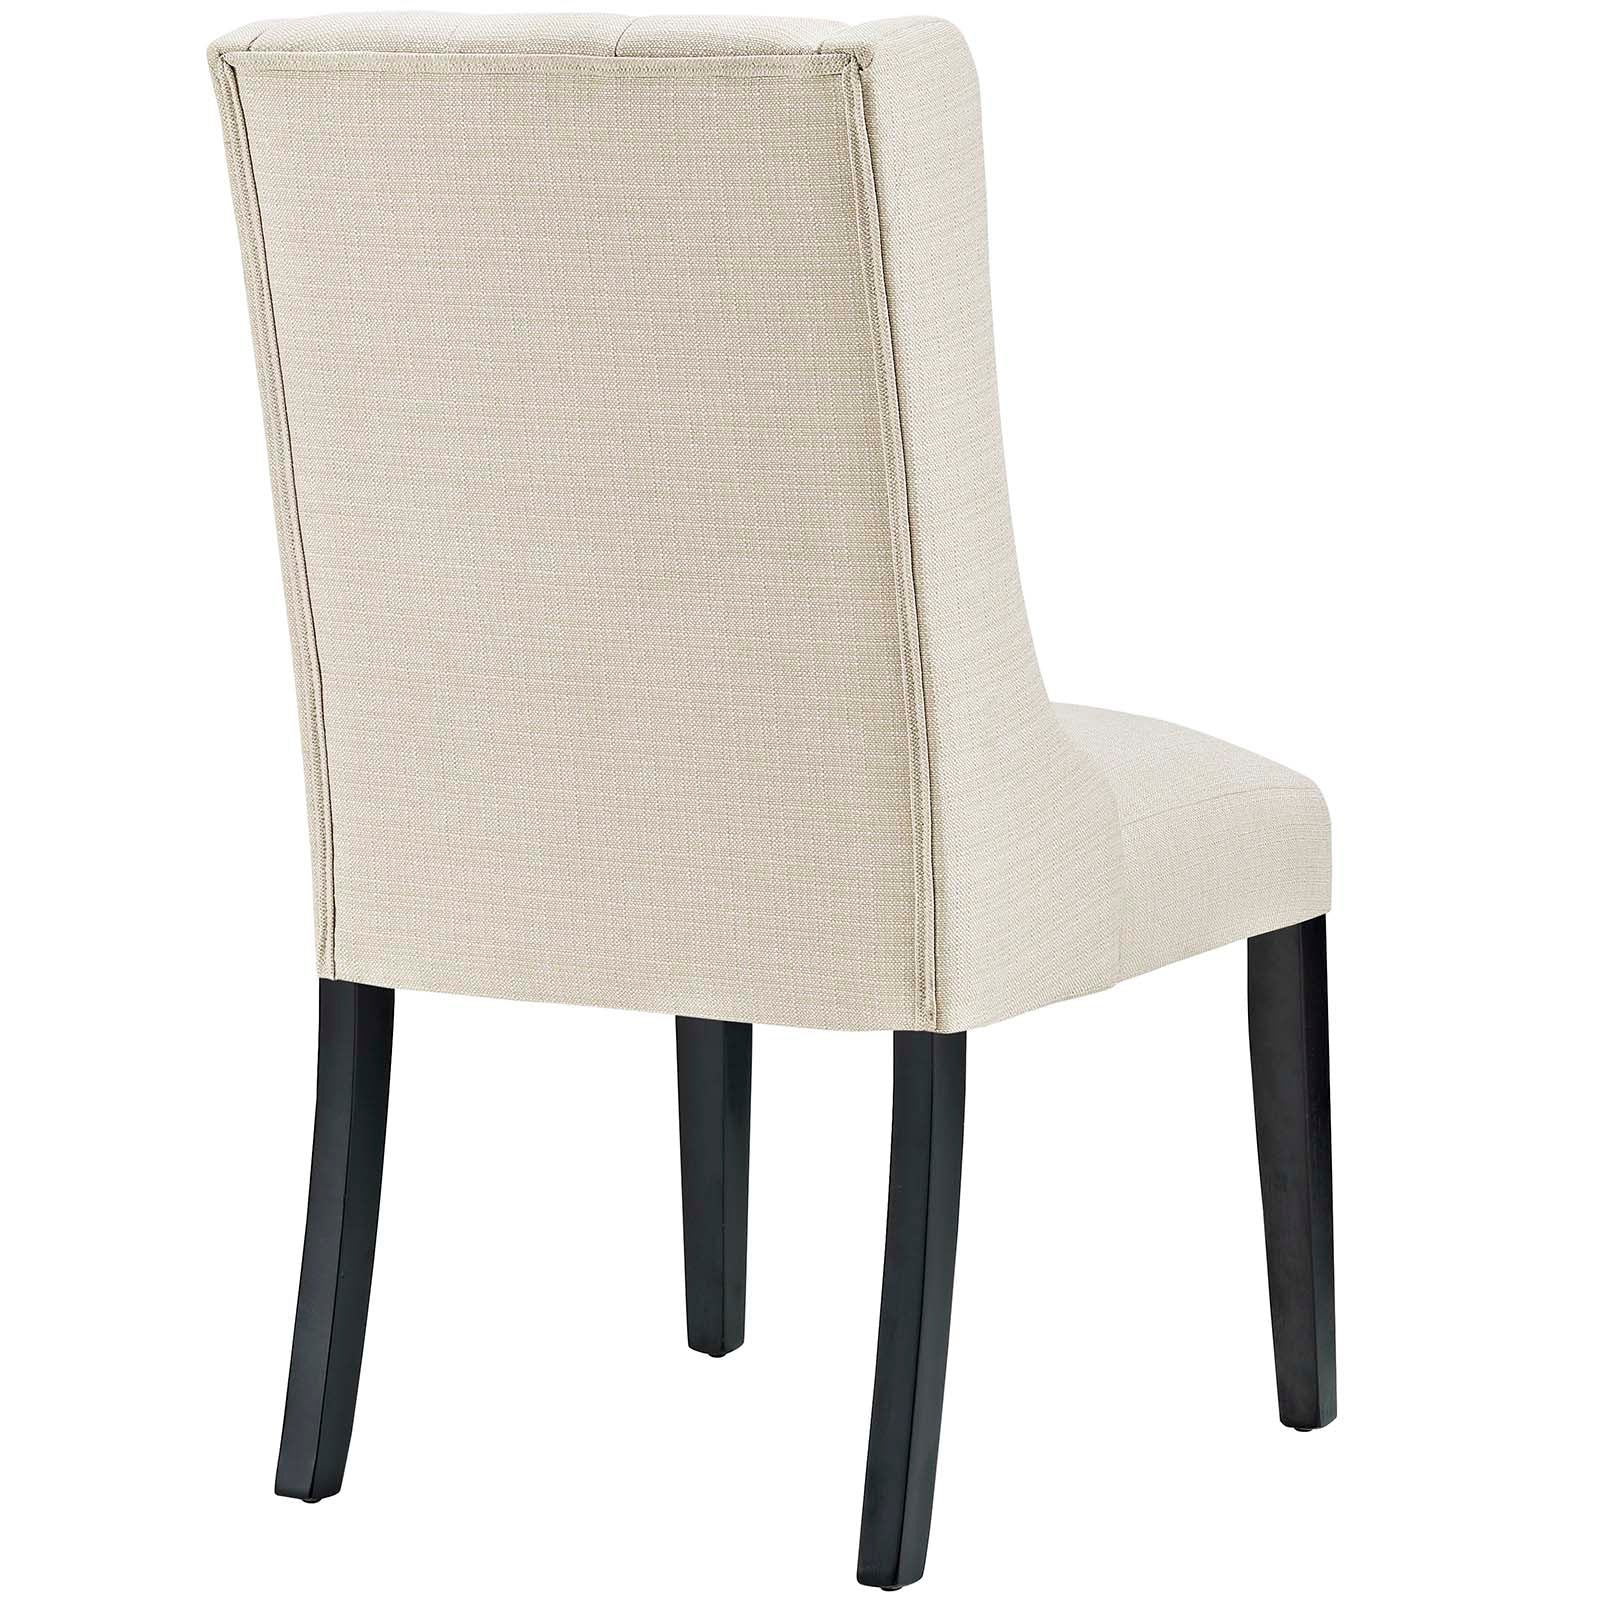 Baronet Dining Chair Fabric Set of 4 - East Shore Modern Home Furnishings